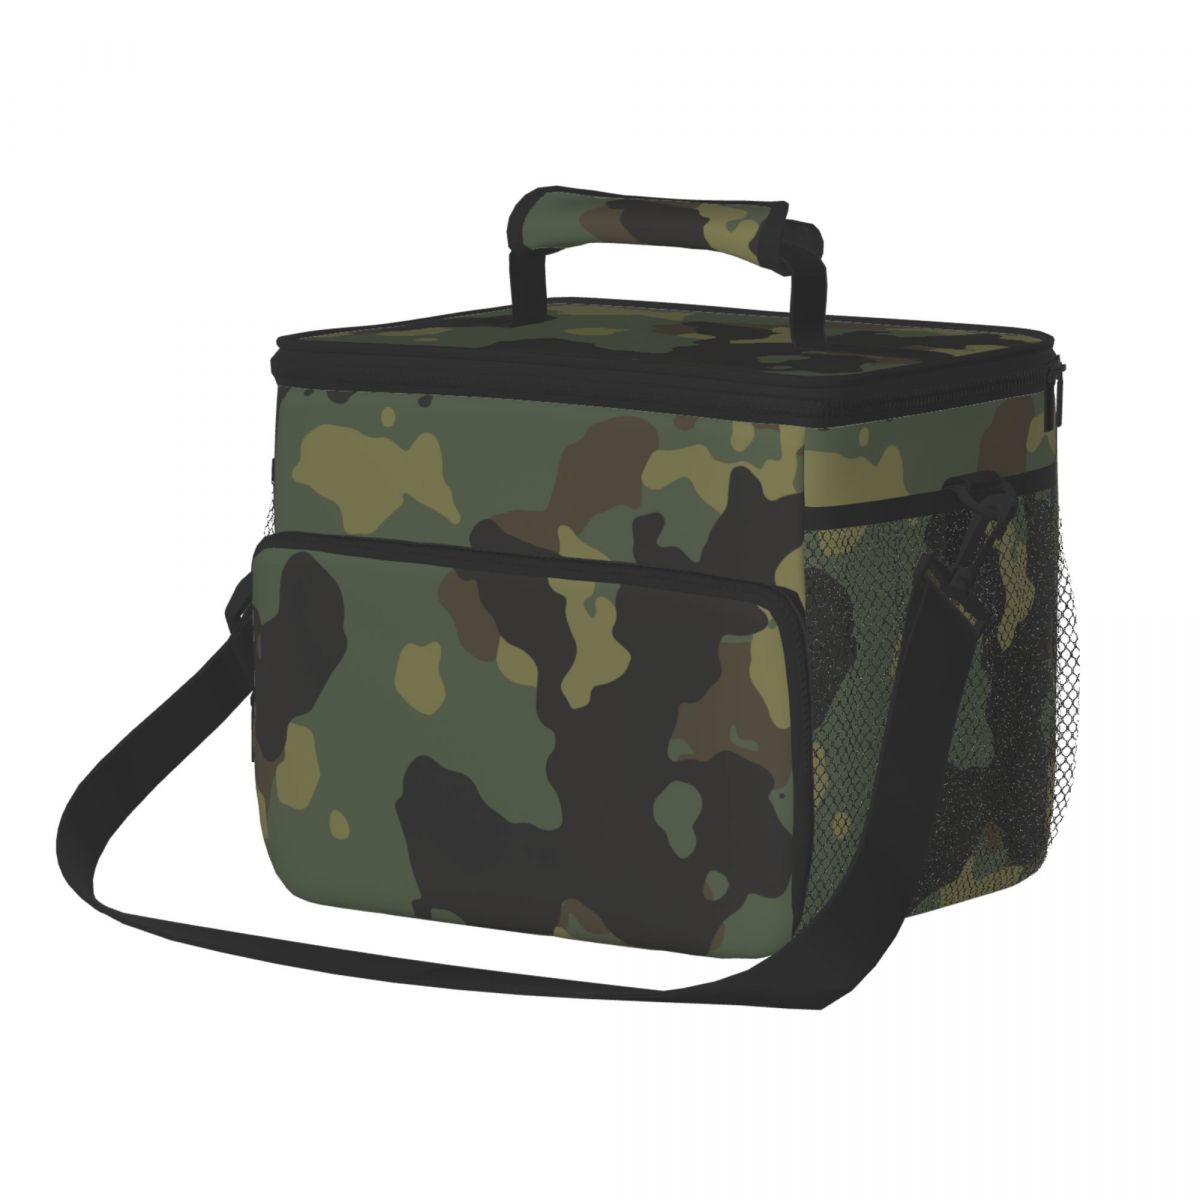 Glacière Souple Isotherme Camouflage Militaire,  sac isotherme gamelle